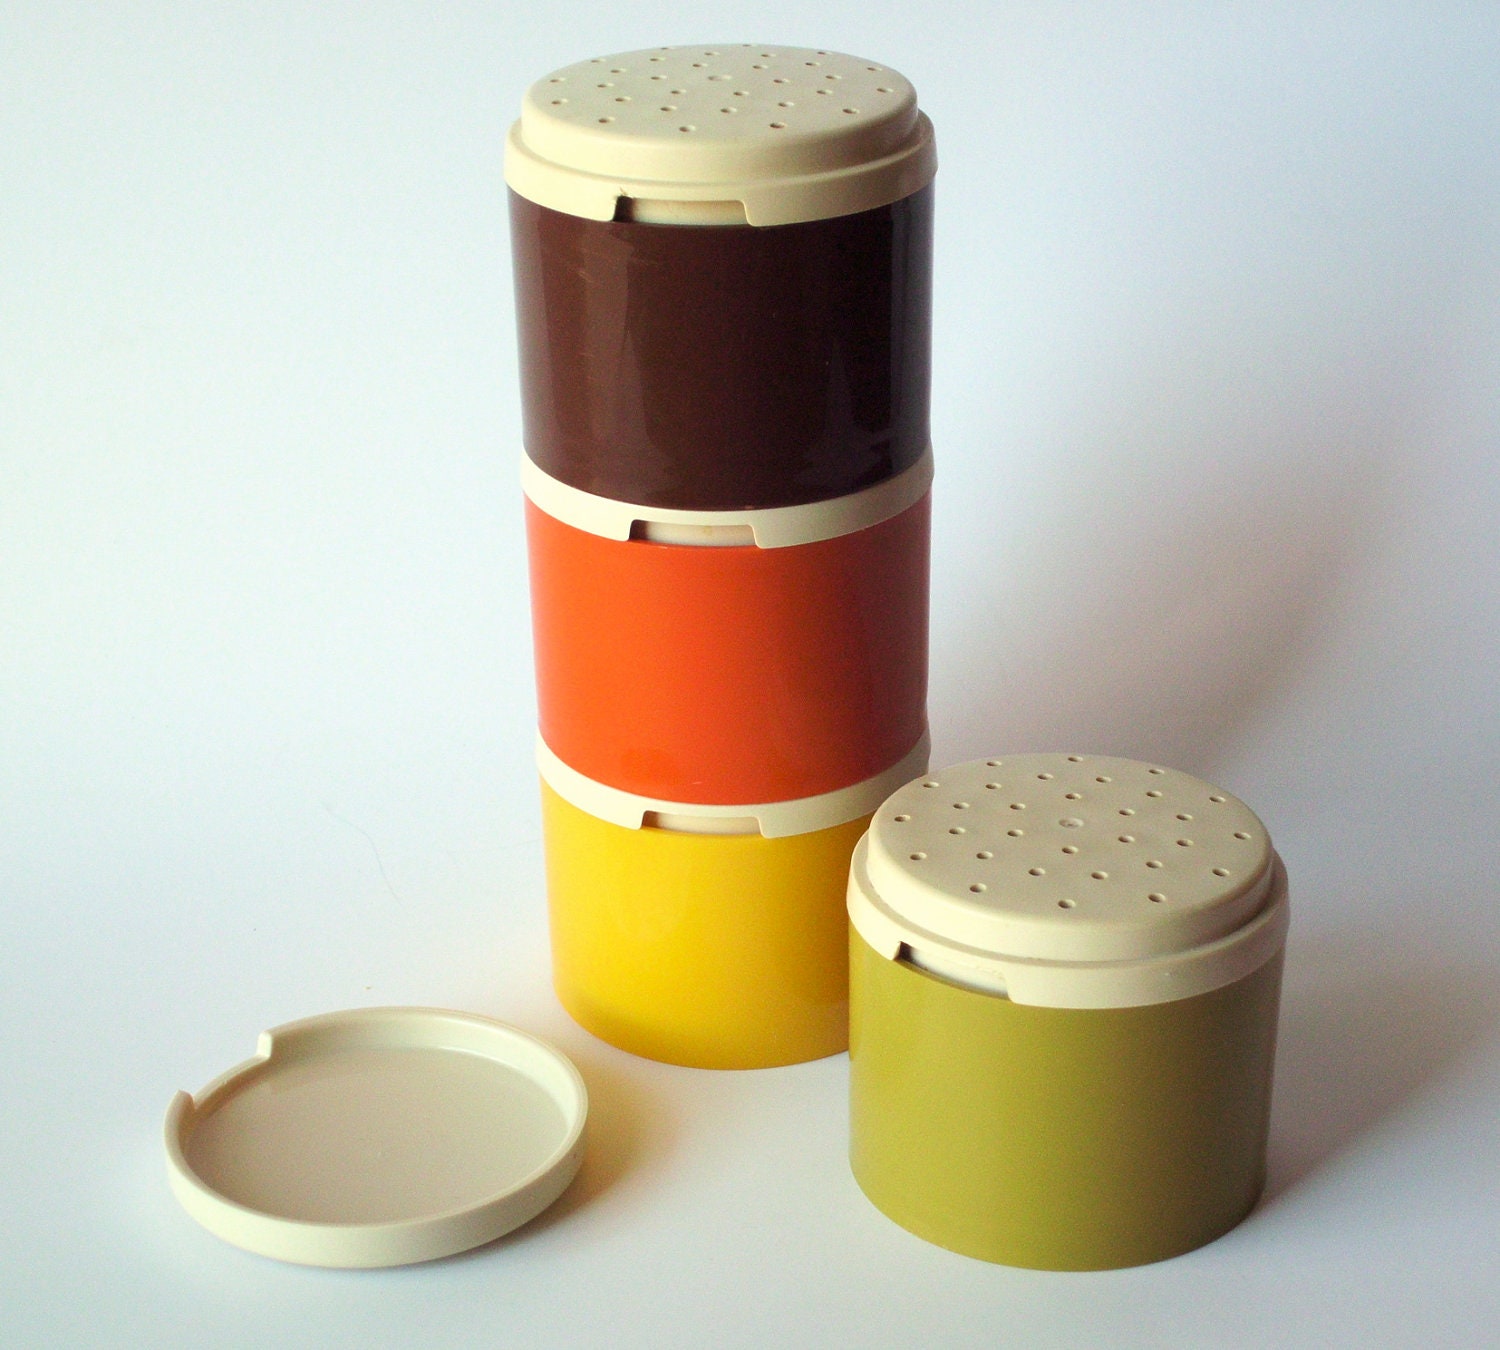 tupperware-stackable-spice-containers-by-poorlittlerobin-on-etsy